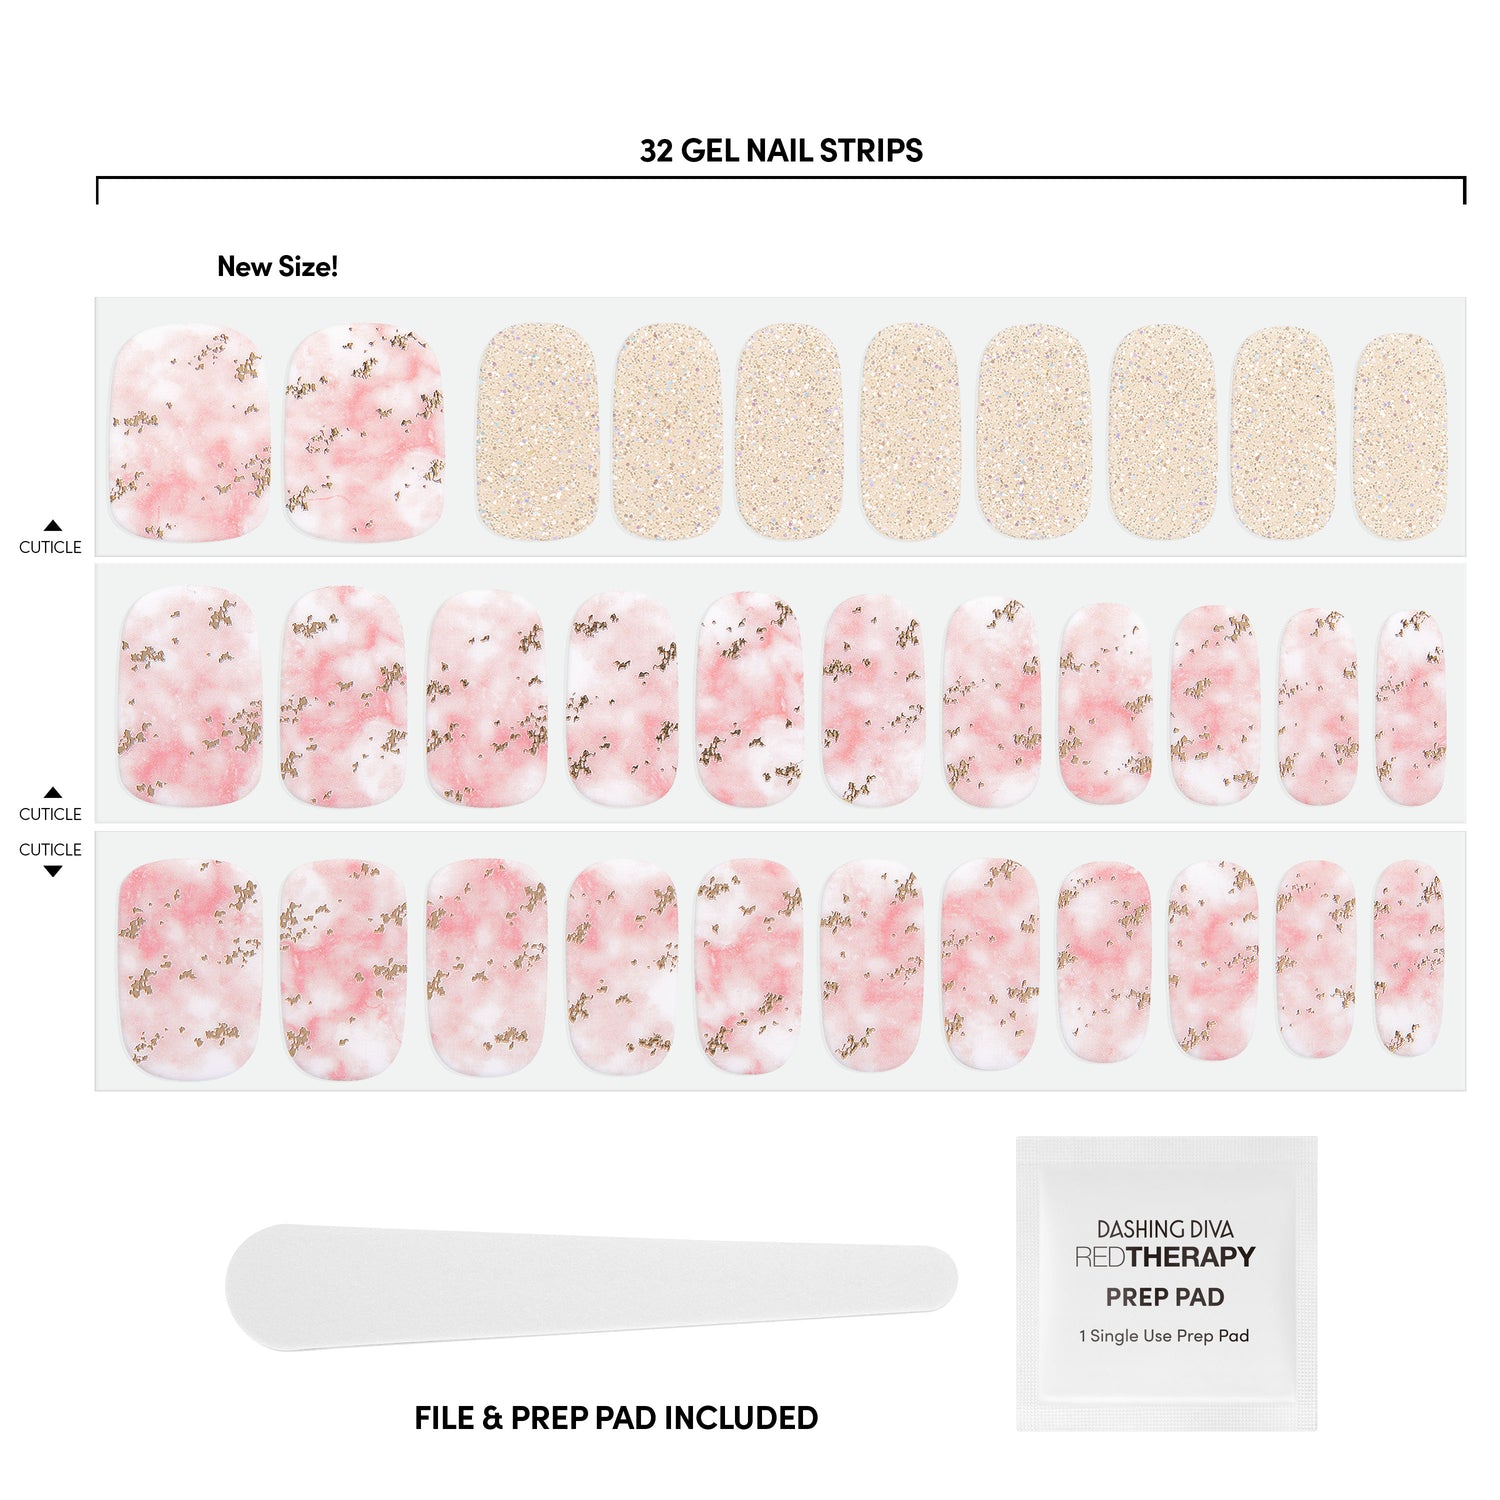 White & blush pink gel nail strips featuring gold glitter with a glossy, high-shine finish